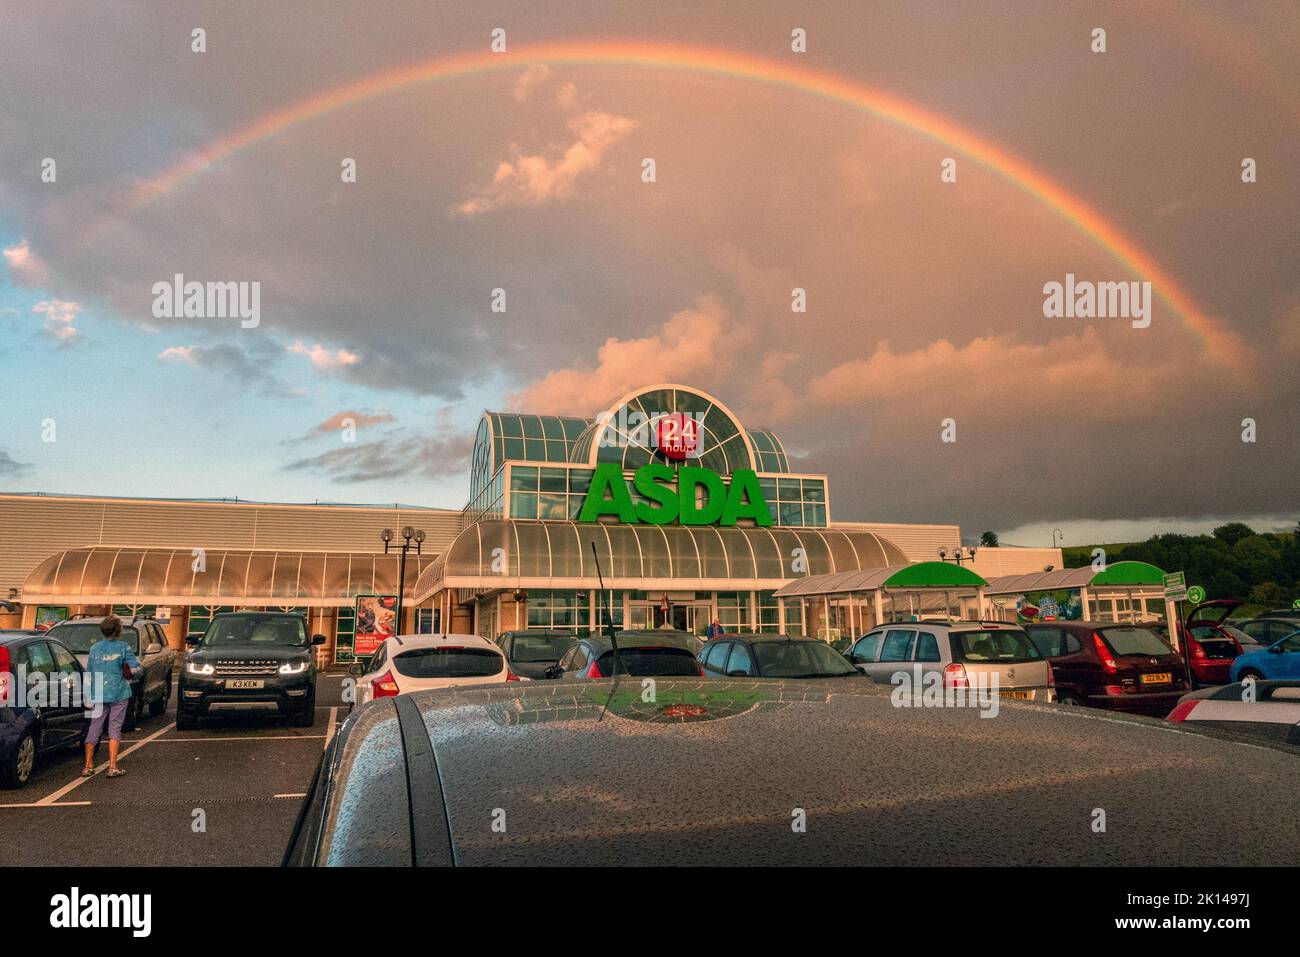 Brighton, September 1st 2015: A rainbow over Hollingbury's Asda superstore during a storm Stock Photo